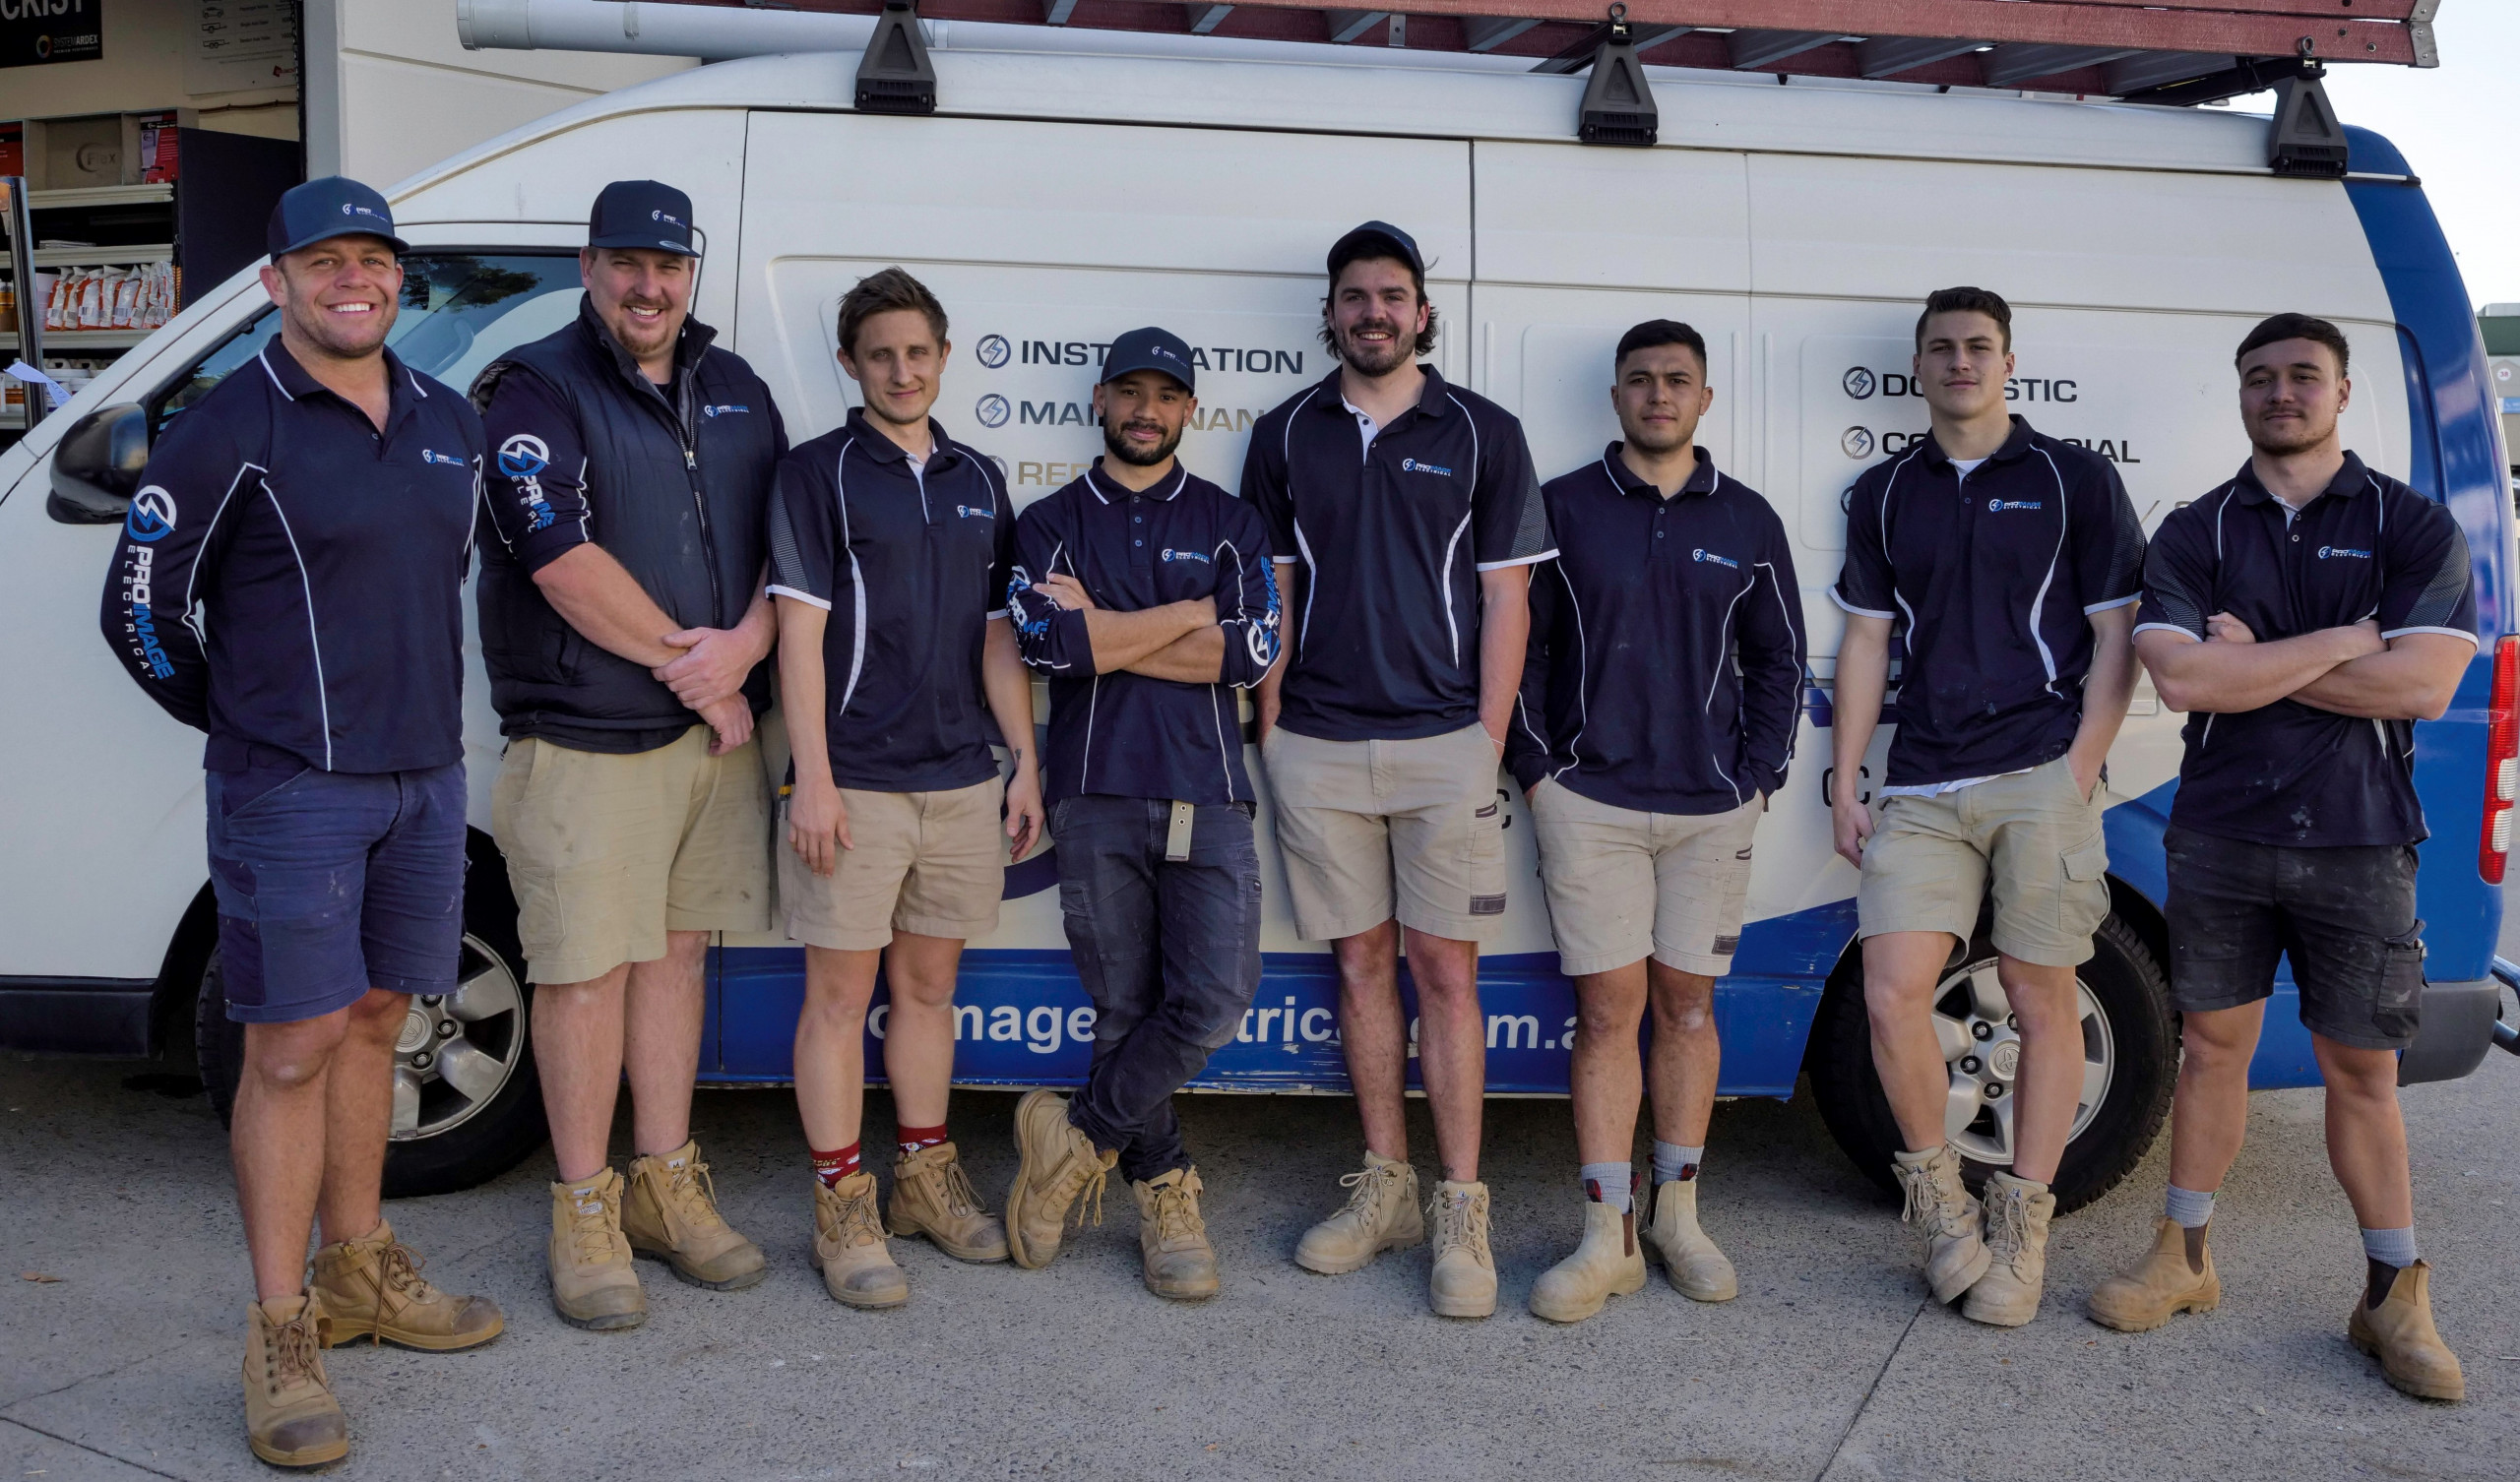 The team at Pro Image Electrical